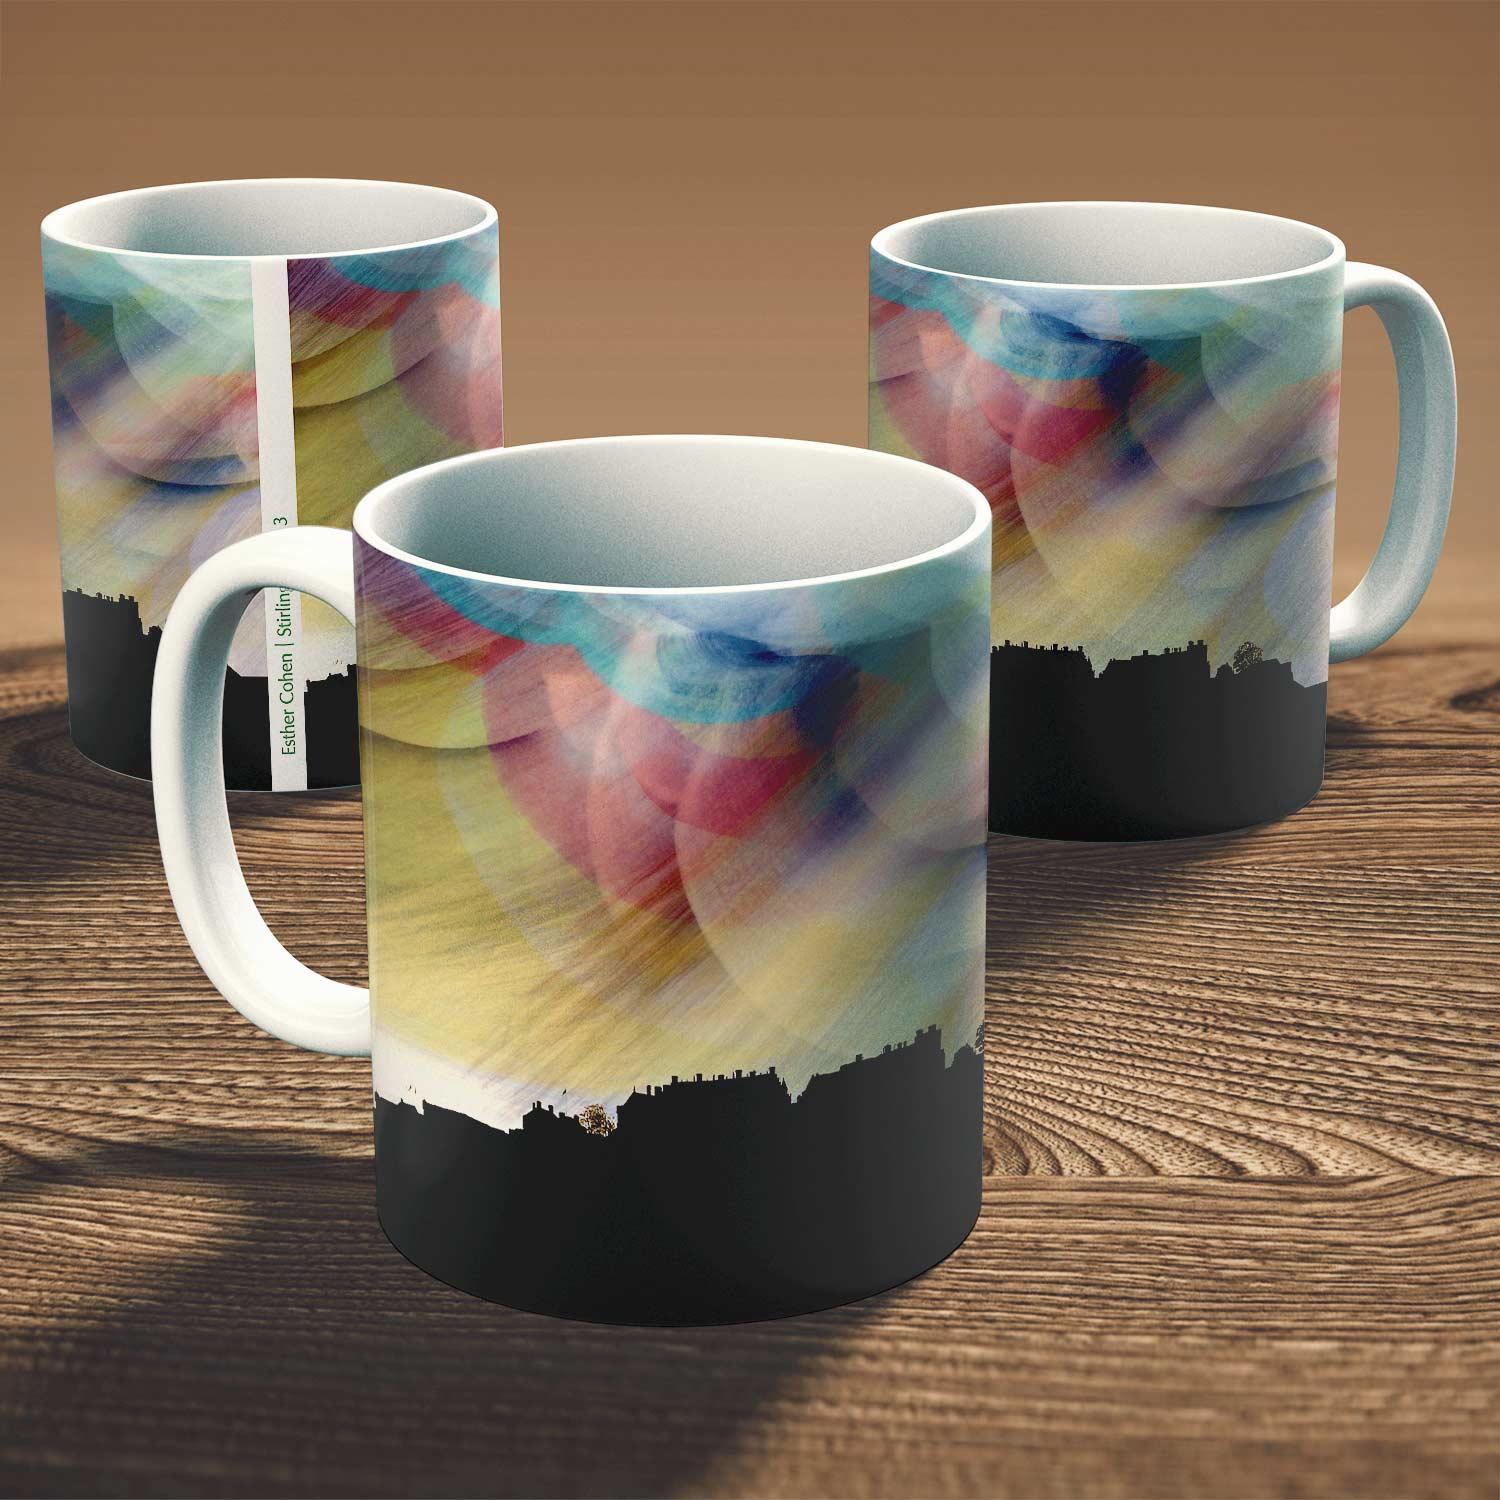 Stirling Castle 3 Mug from an original painting by artist Esther Cohen